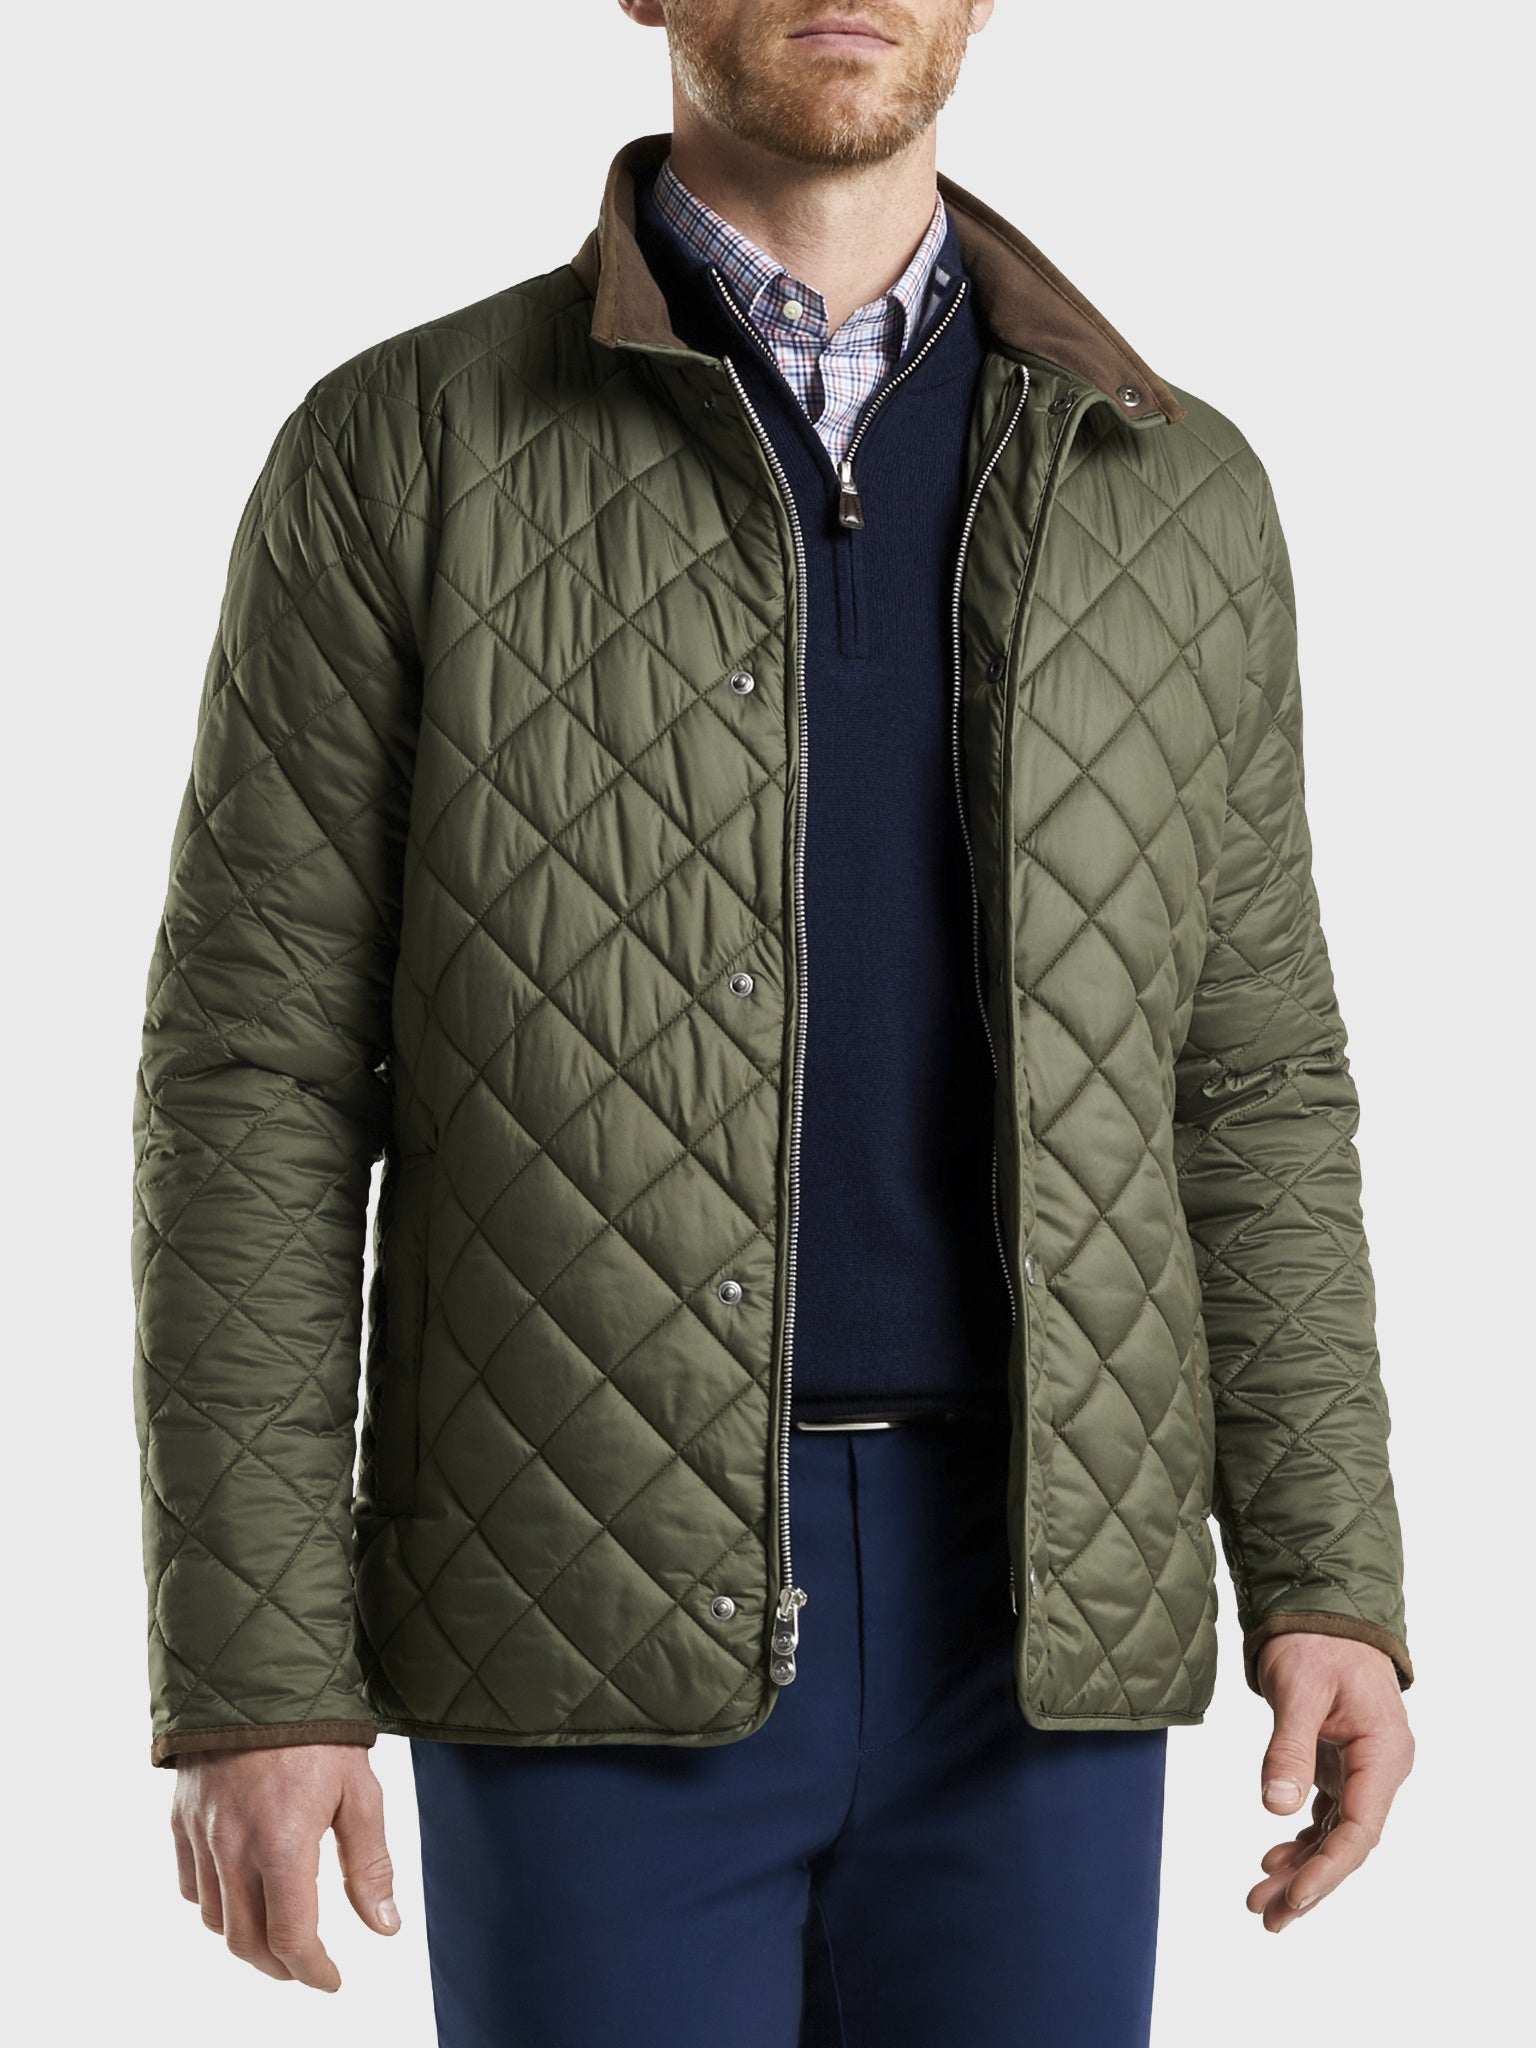 Suffolk Quilted Travel Coat - www.inf-inet.com